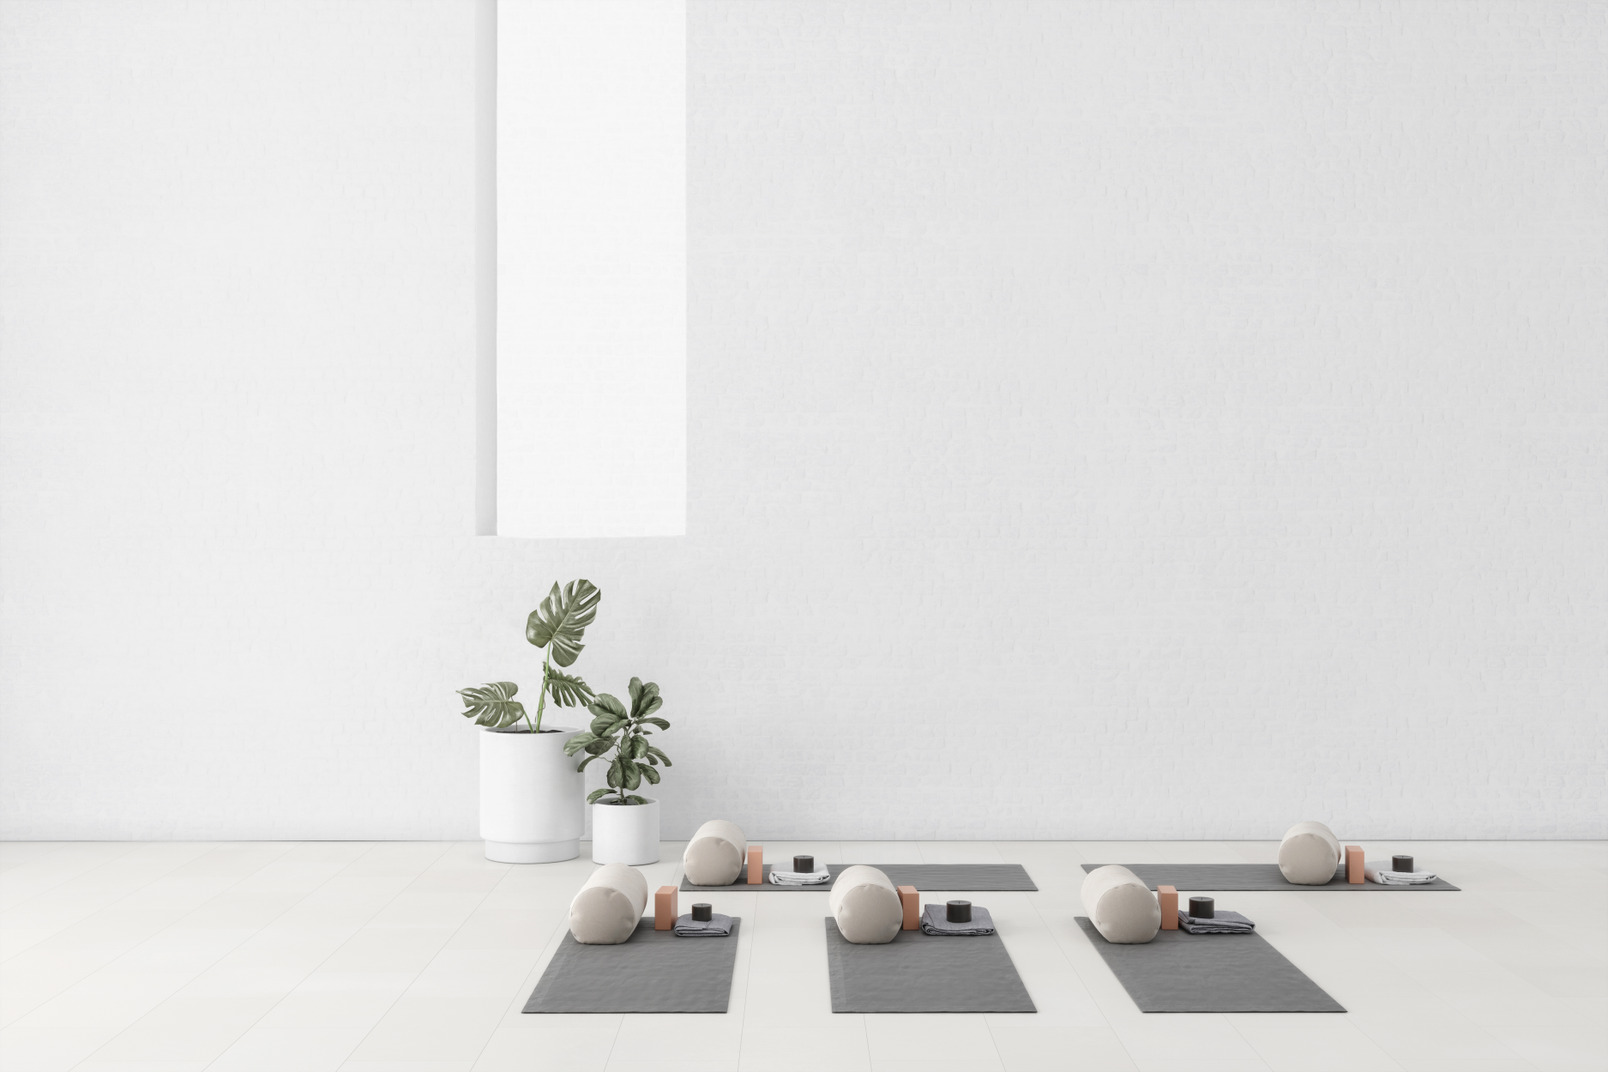 A white minimalistic fitness studio, with potted plants and yoga mats